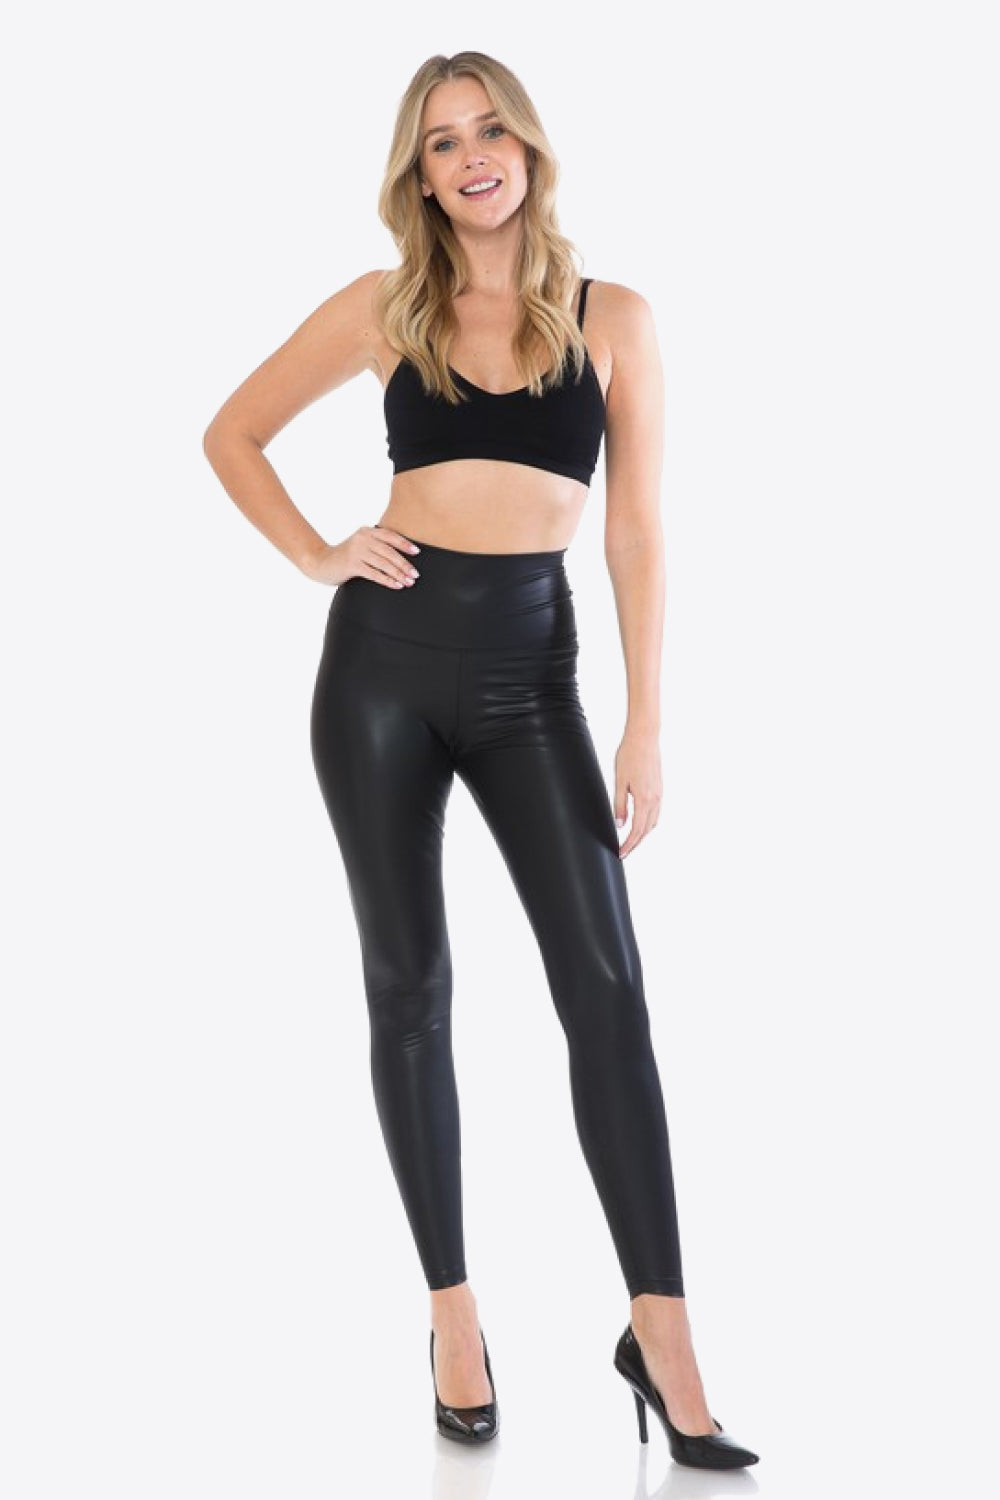 LOVEIT Full Size PU Leather Wide Waistband Leggings in Black - Cheeky Chic Boutique